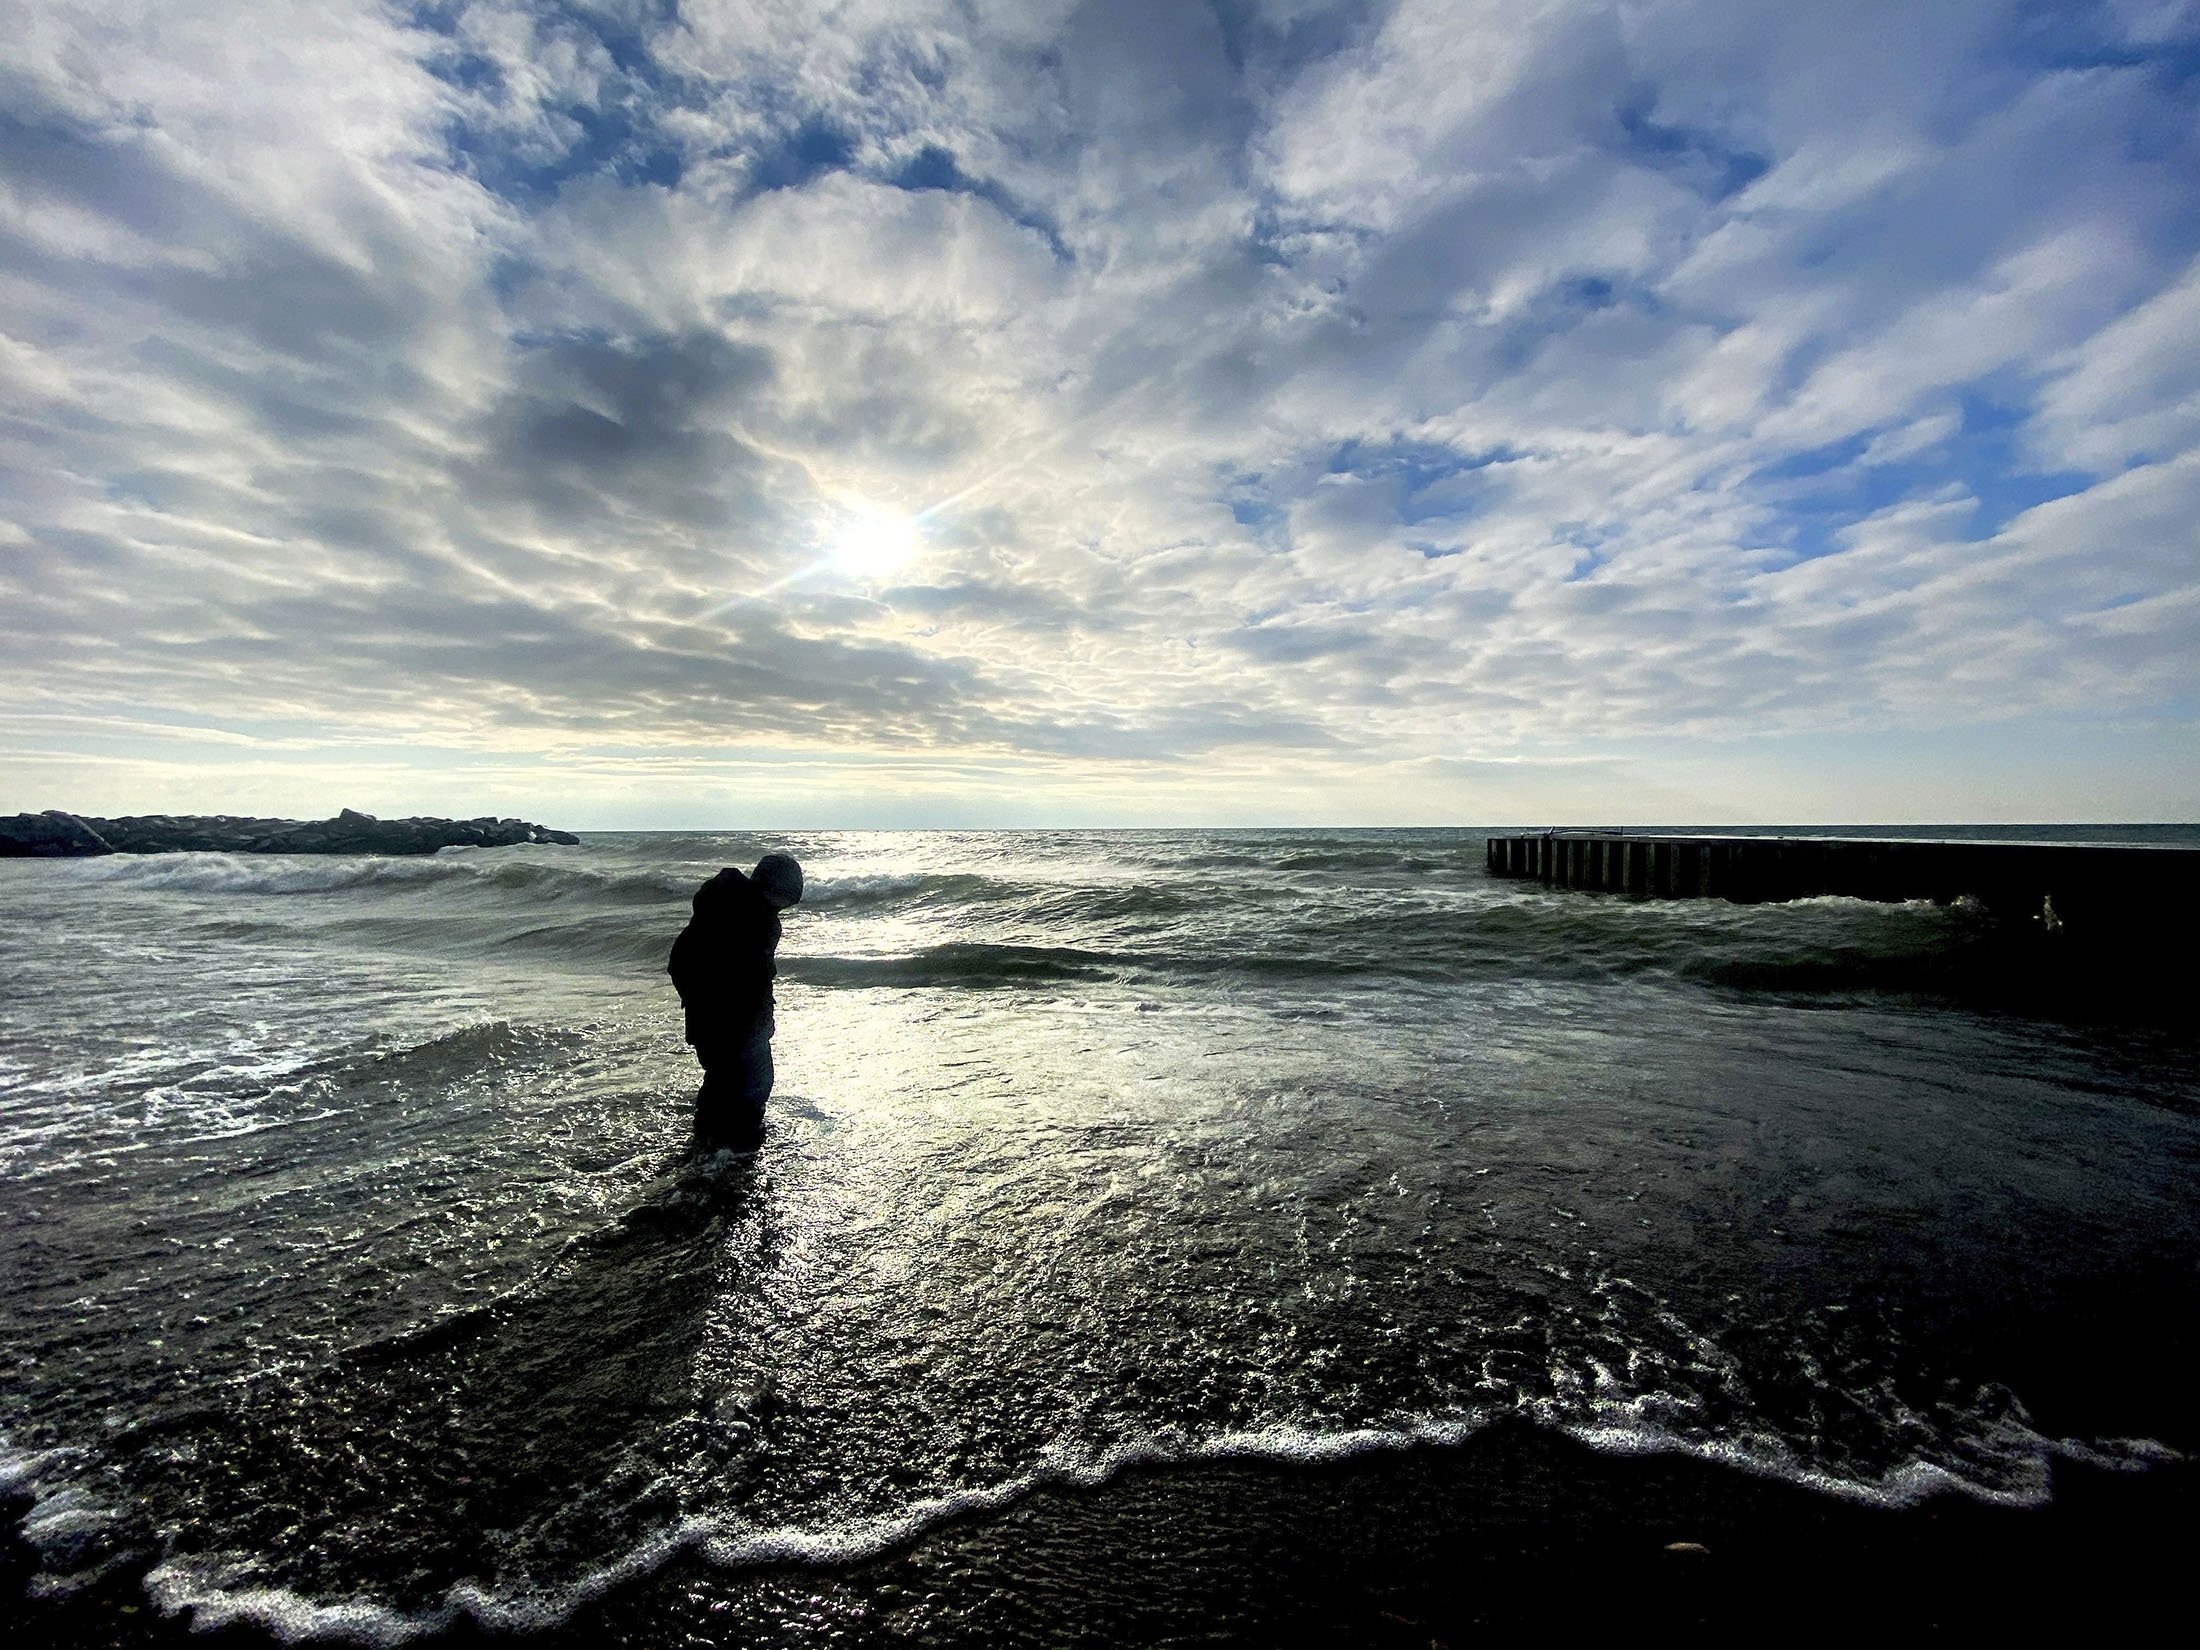 A young boy plays in the surf by the shore of Lake Ontario in Toronto, Canada, Jan. 21, 2021. (AP Photo)